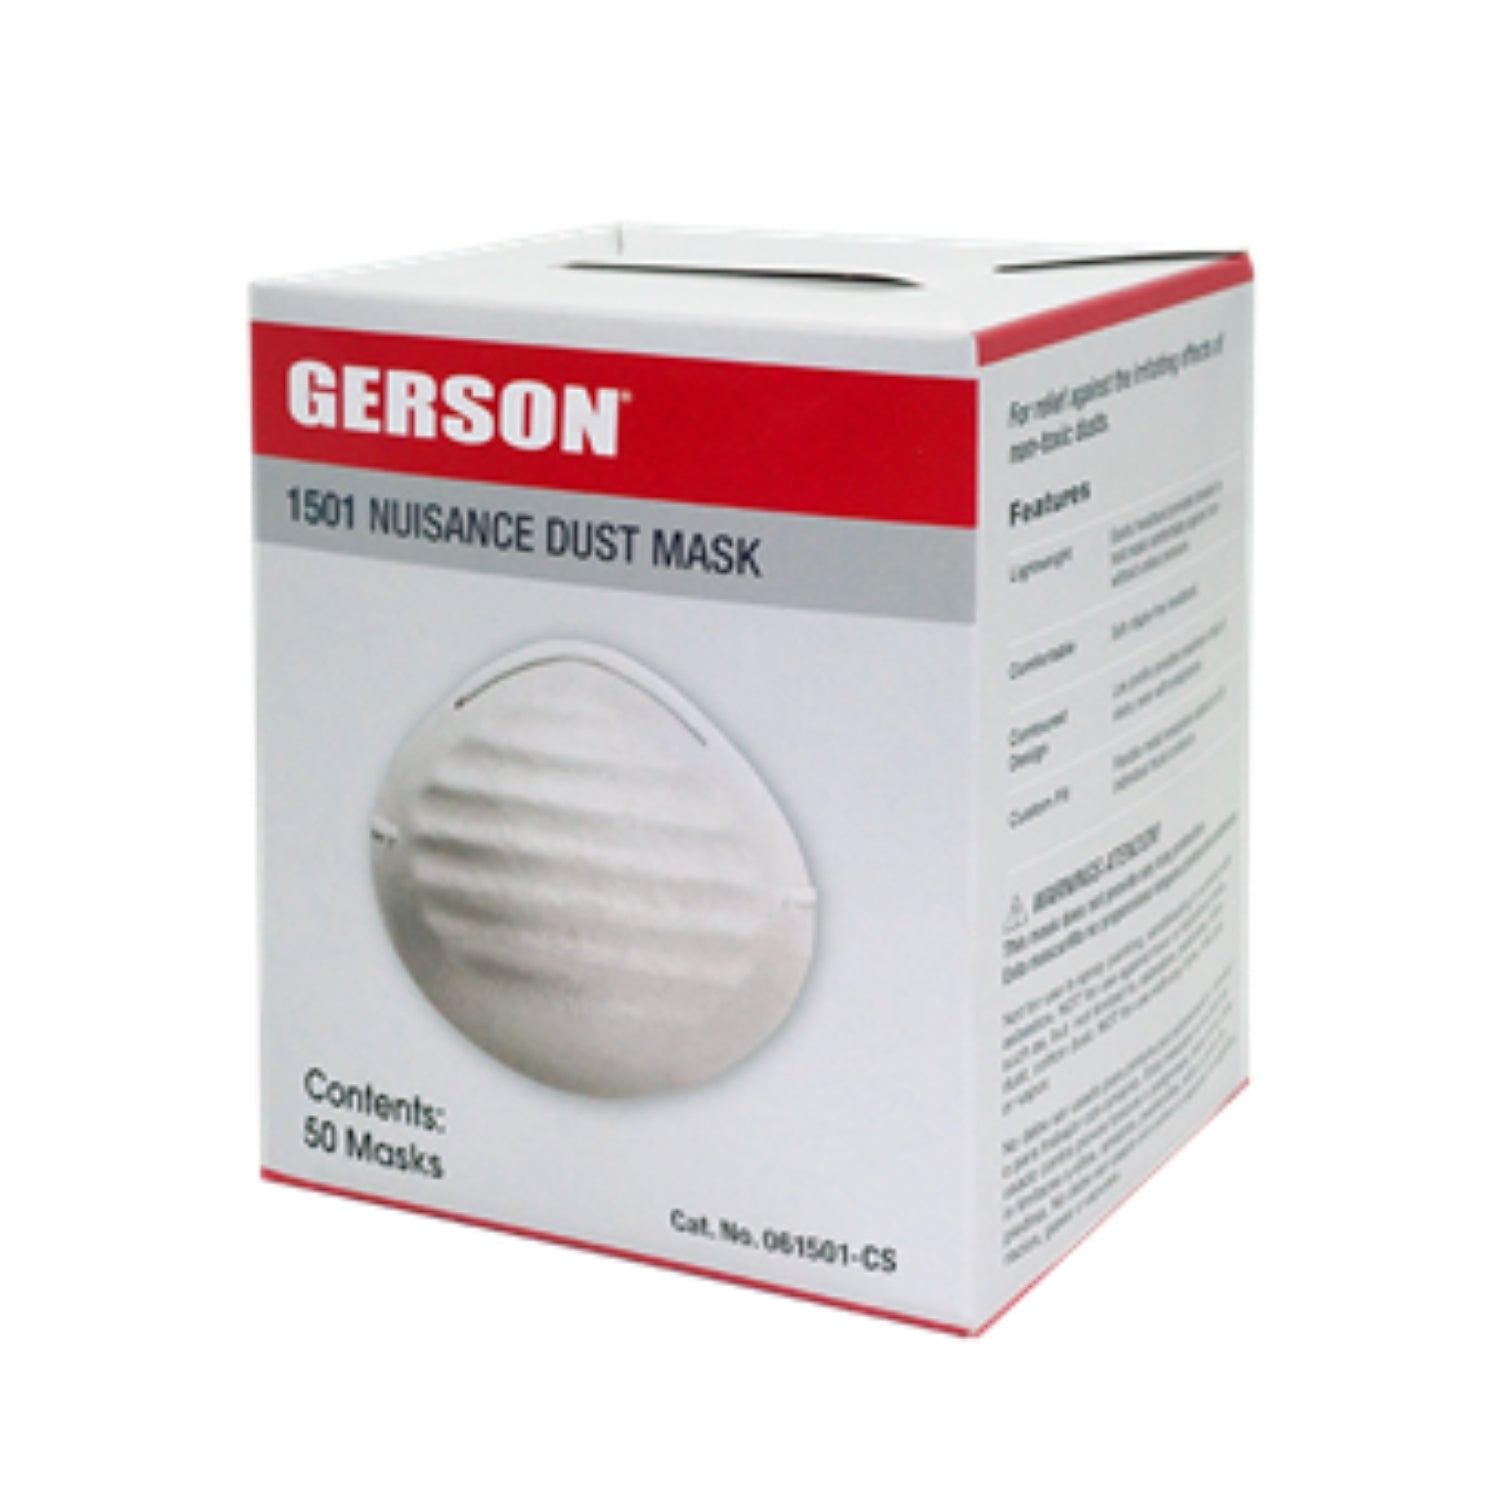 GERSON Nuisance Dust Masks, Mouth and Nose, Dust; Non-Toxic Particles, One Size